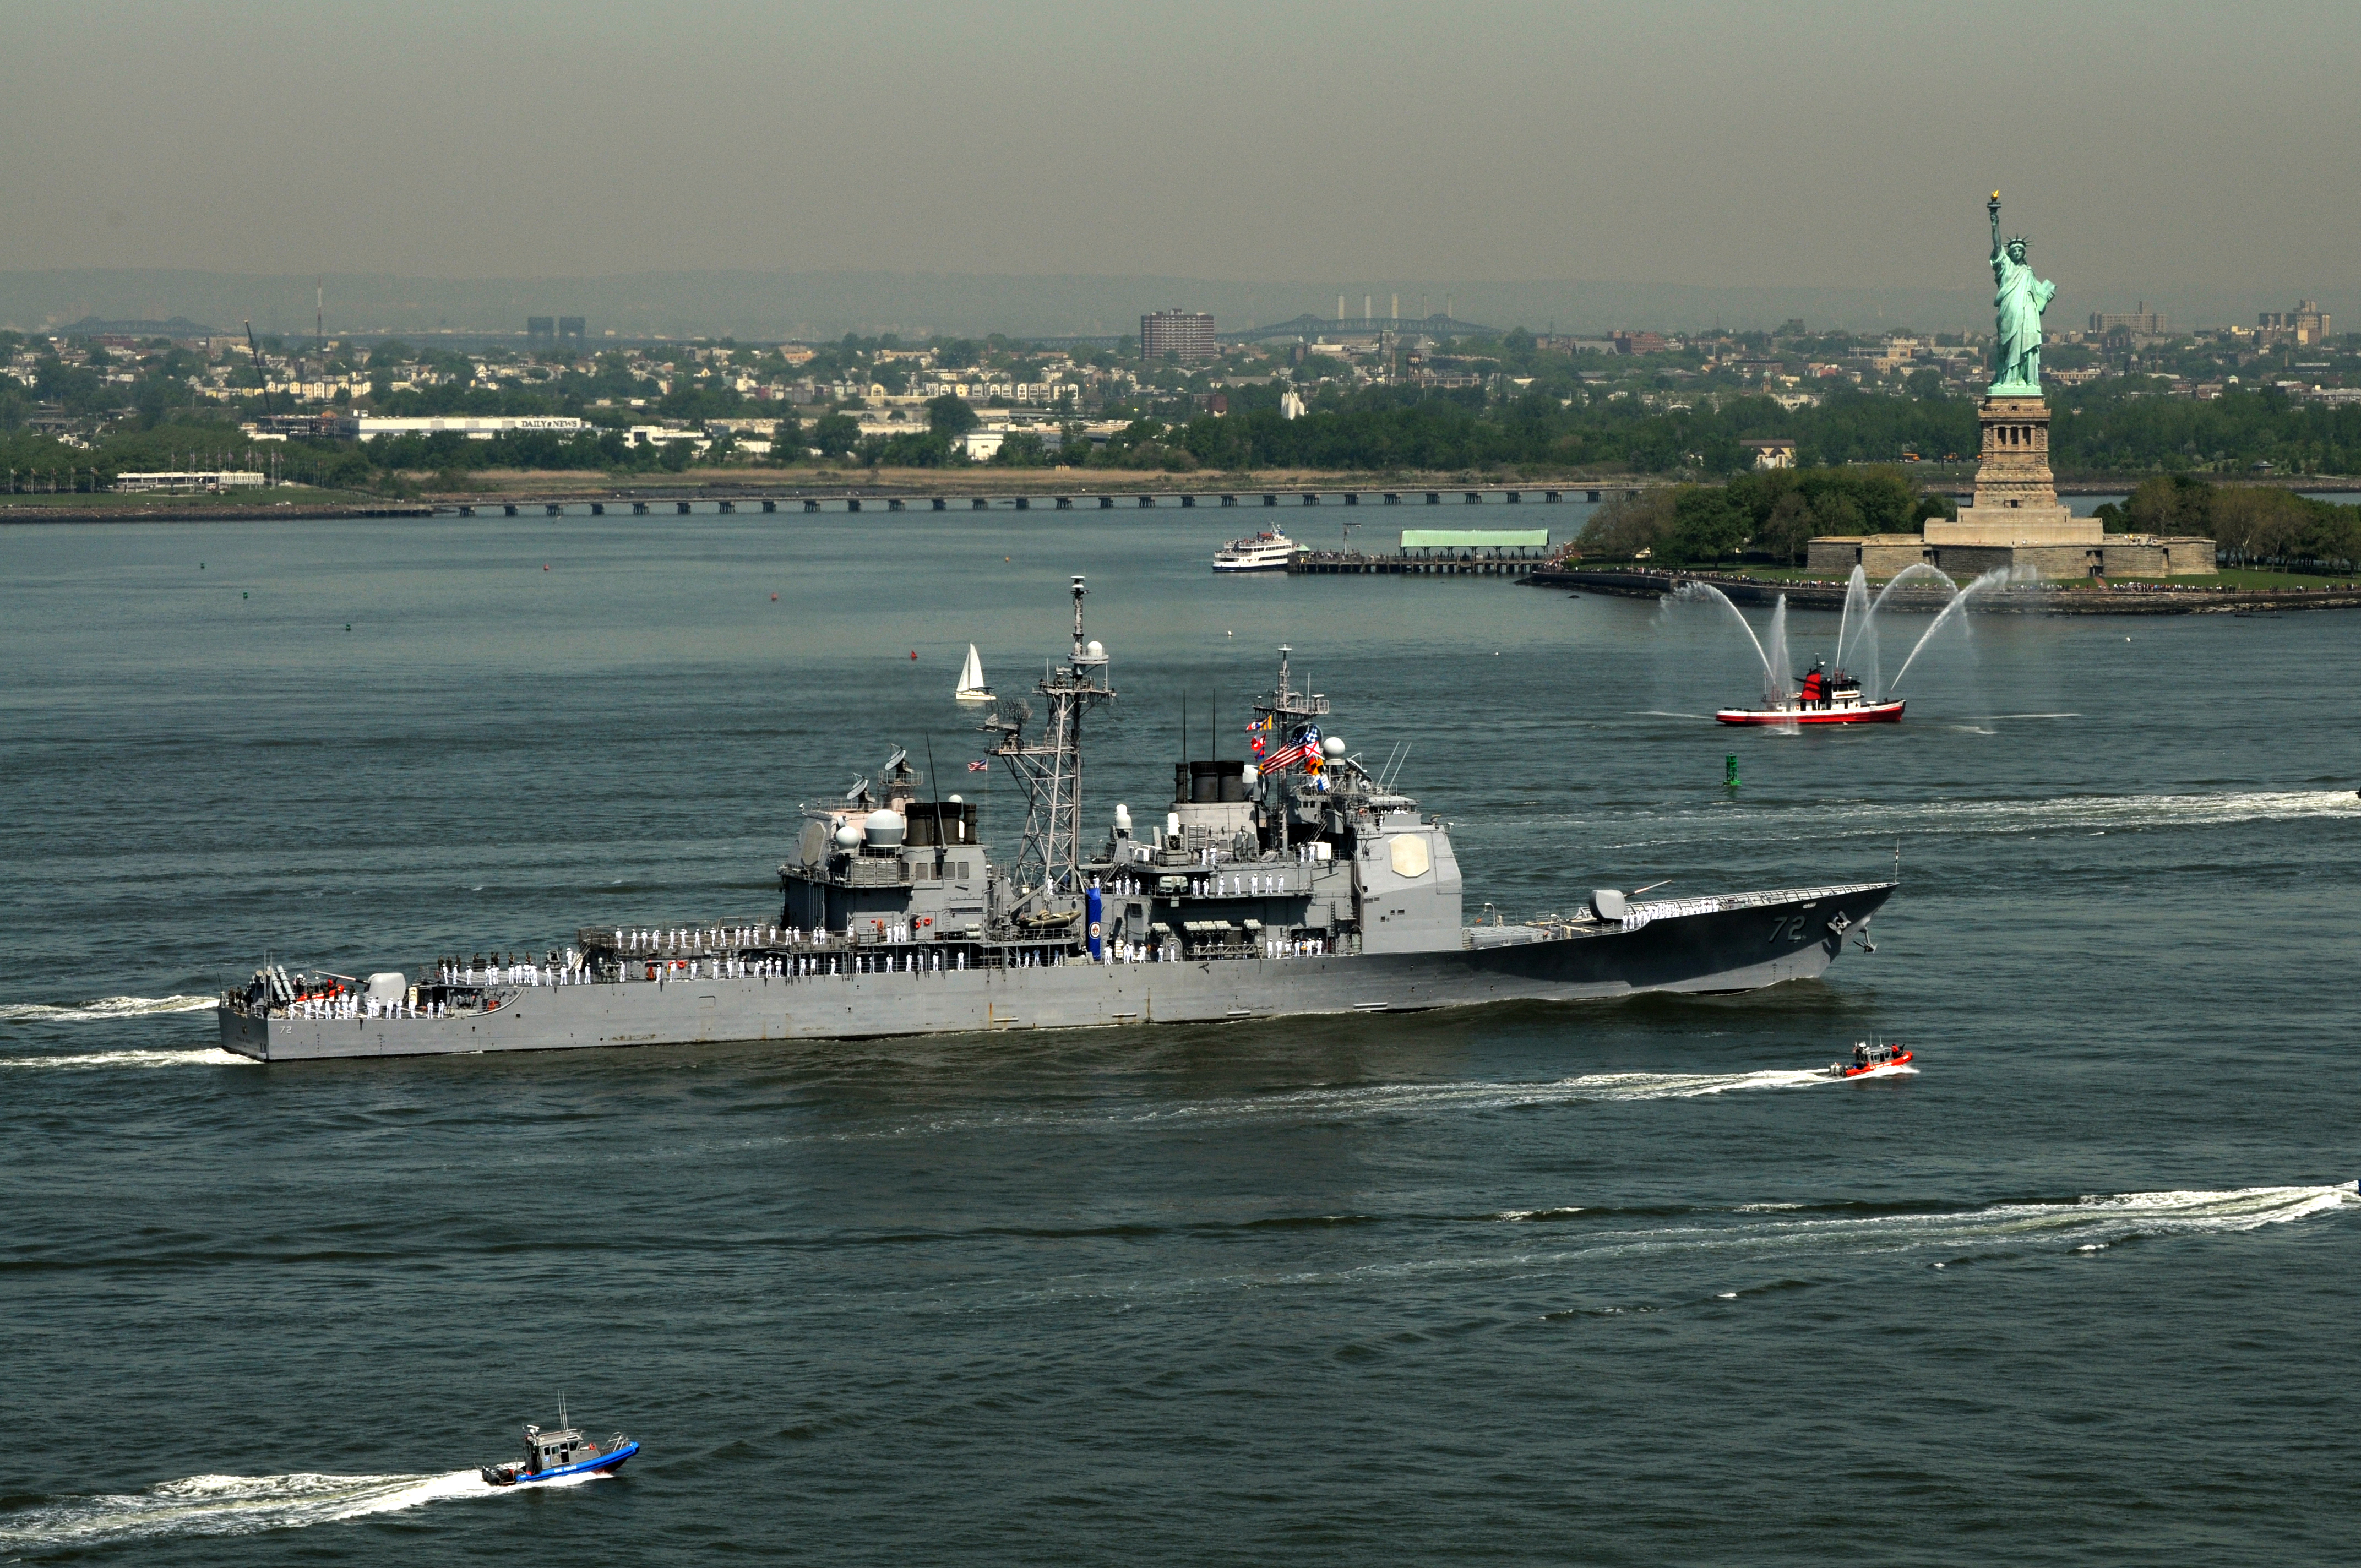 US Navy 090520-N-8907D-258 The guided-missile cruiser USS Vella Gulf (CG 72) transits the Hudson River during the Parade of Ships as part of Fleet Week New York City 2009